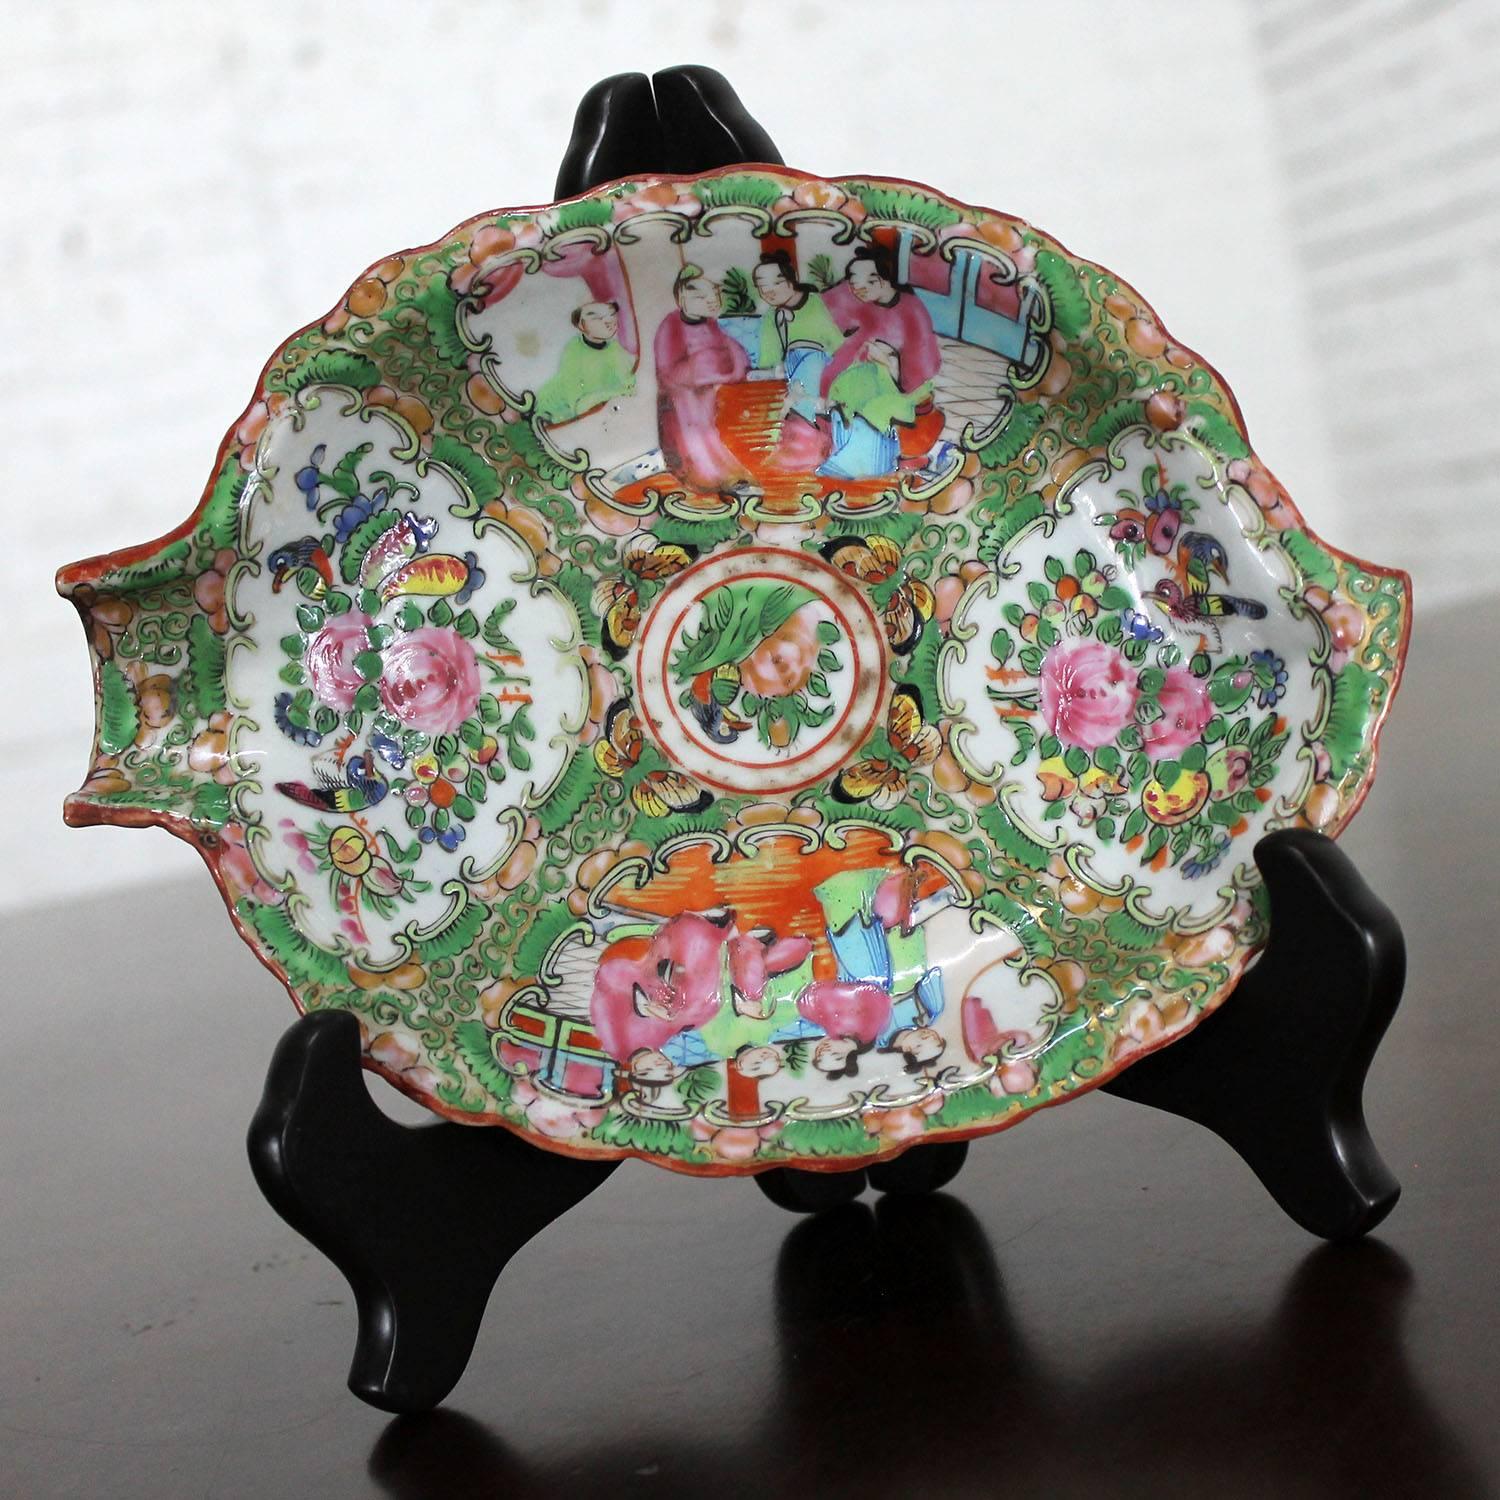 Wonderful and delicate antique Chinese Rose Medallion leaf shaped dish or small tray in the traditional medallion design of village scenes, floral and birds. Qing Dynasty circa 1850-1890 and in wonderful antique condition. The hand-painting is in